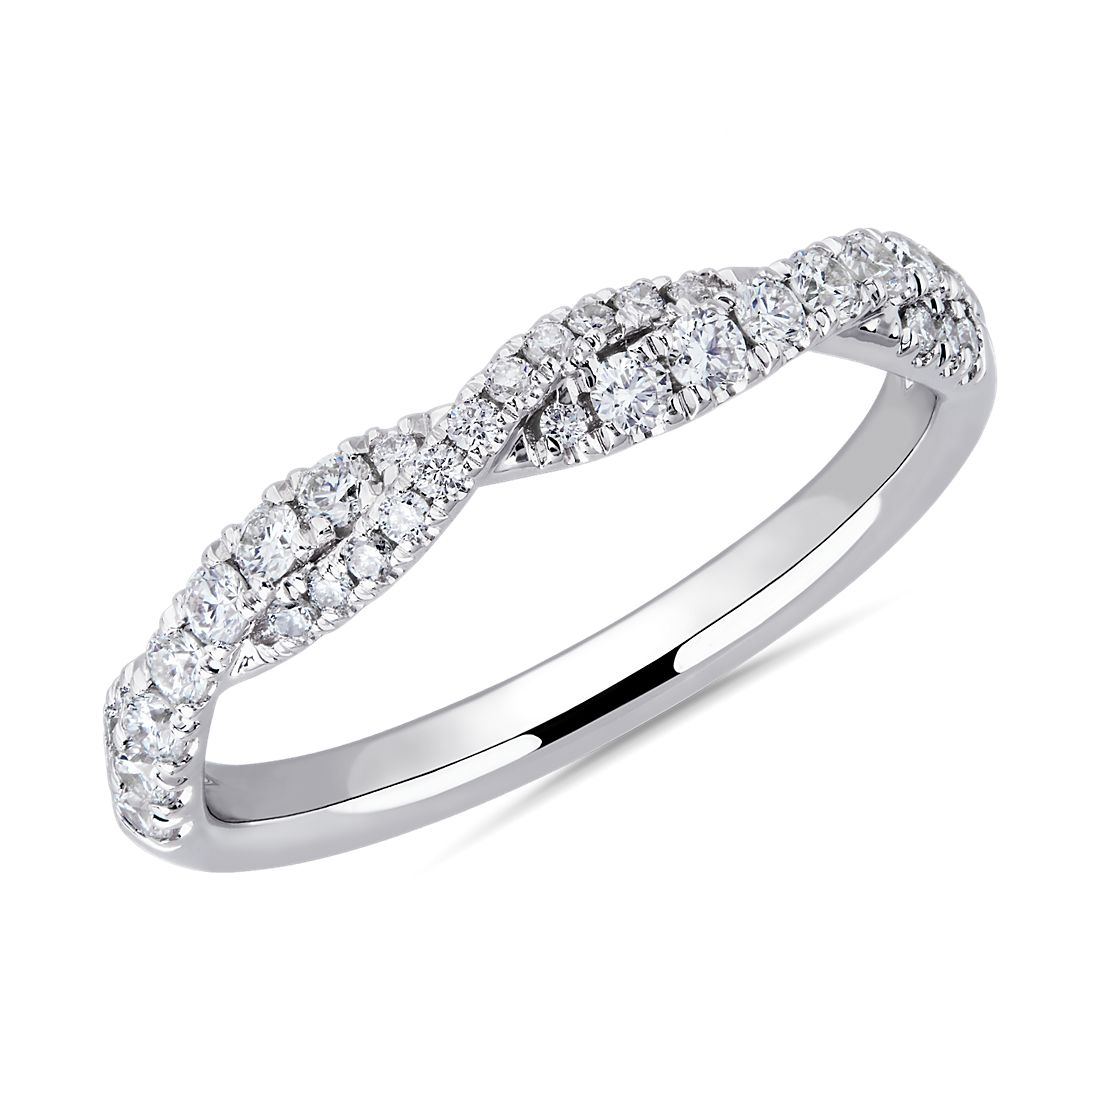 Overlapping Twist Diamond Ring in 14k White Gold (0.31 ct. tw.)